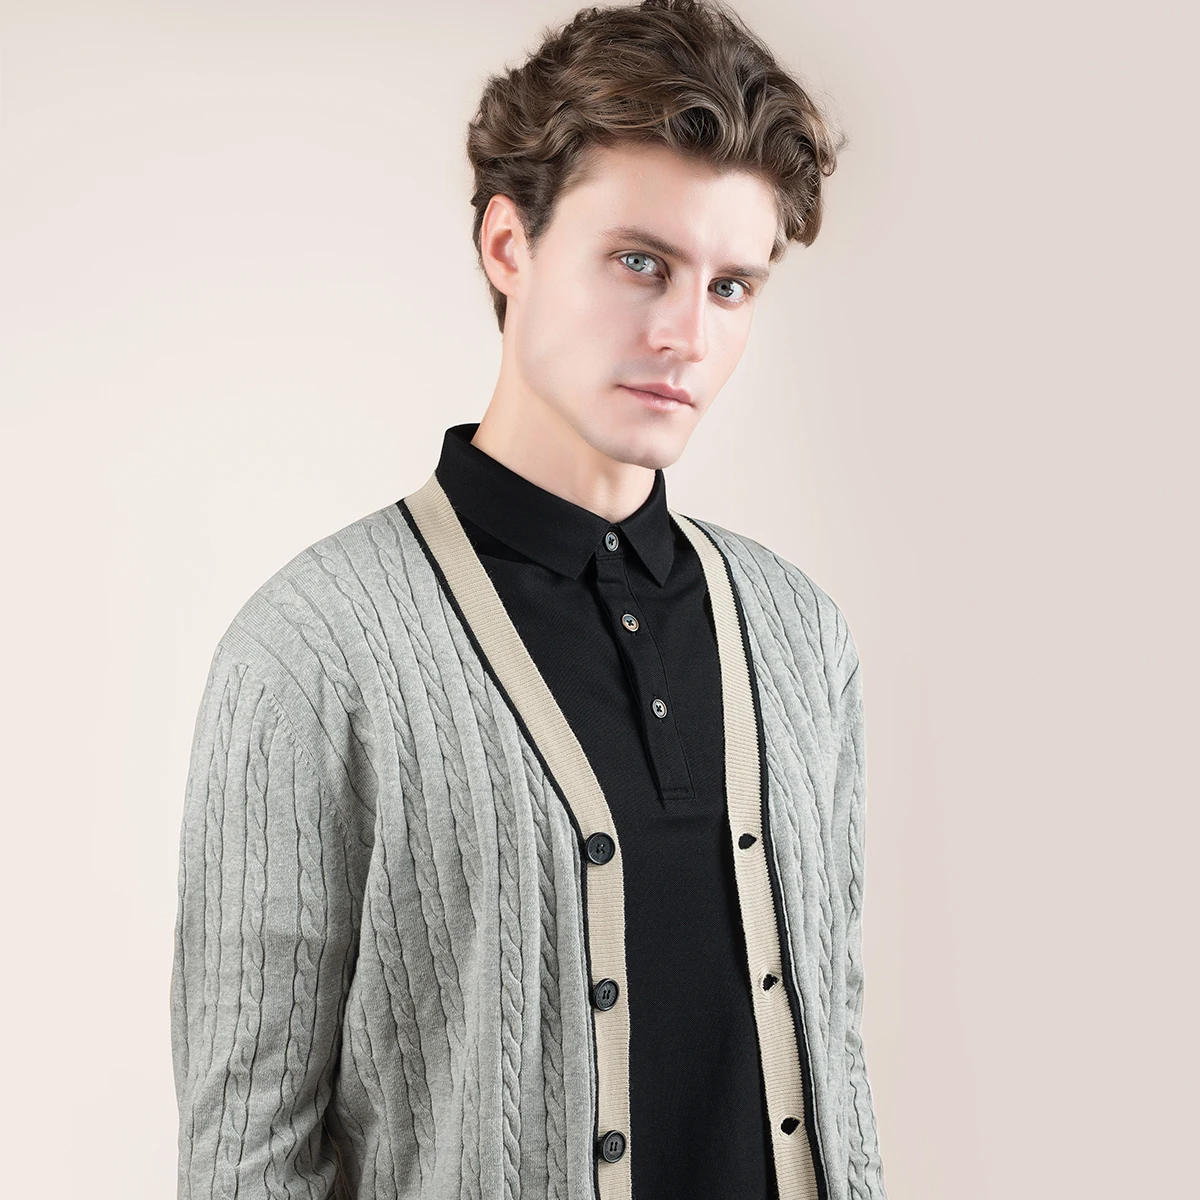 HELLEN&WOODY Autumn Winter Men Clothes Long Sleeve Twist Rope Cardigan Sweater Casual Bottoming Warm 8232030903